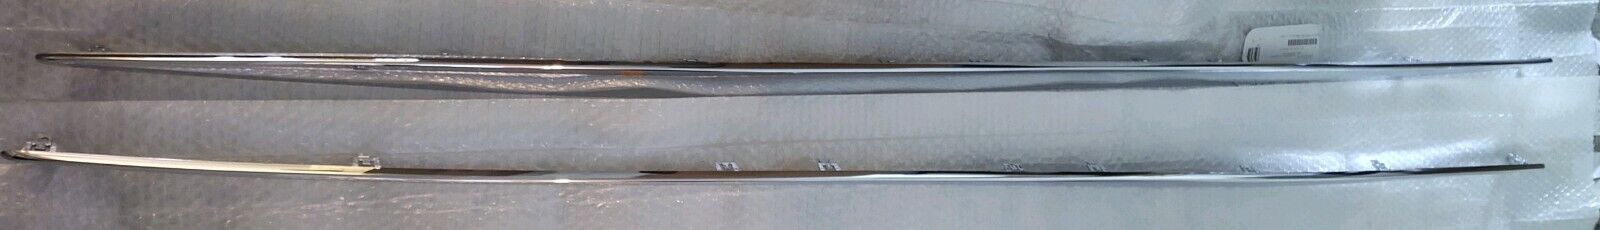 Mercedes OEM Chrome Side Skirt Trim C217 Coupe Convertible For AMG Skirts New